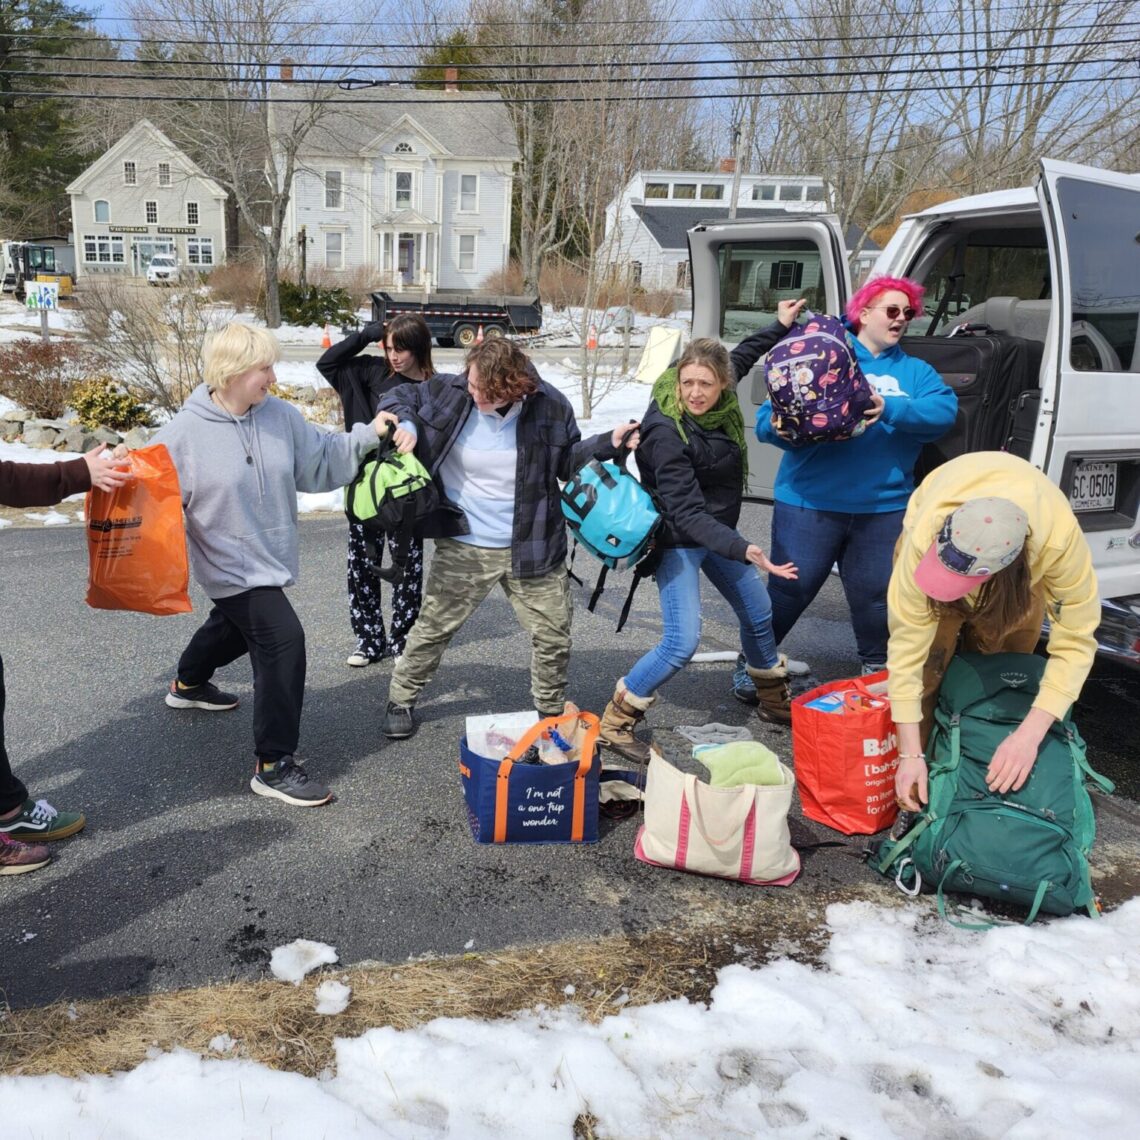 Students and staff load a van in very staged photo.